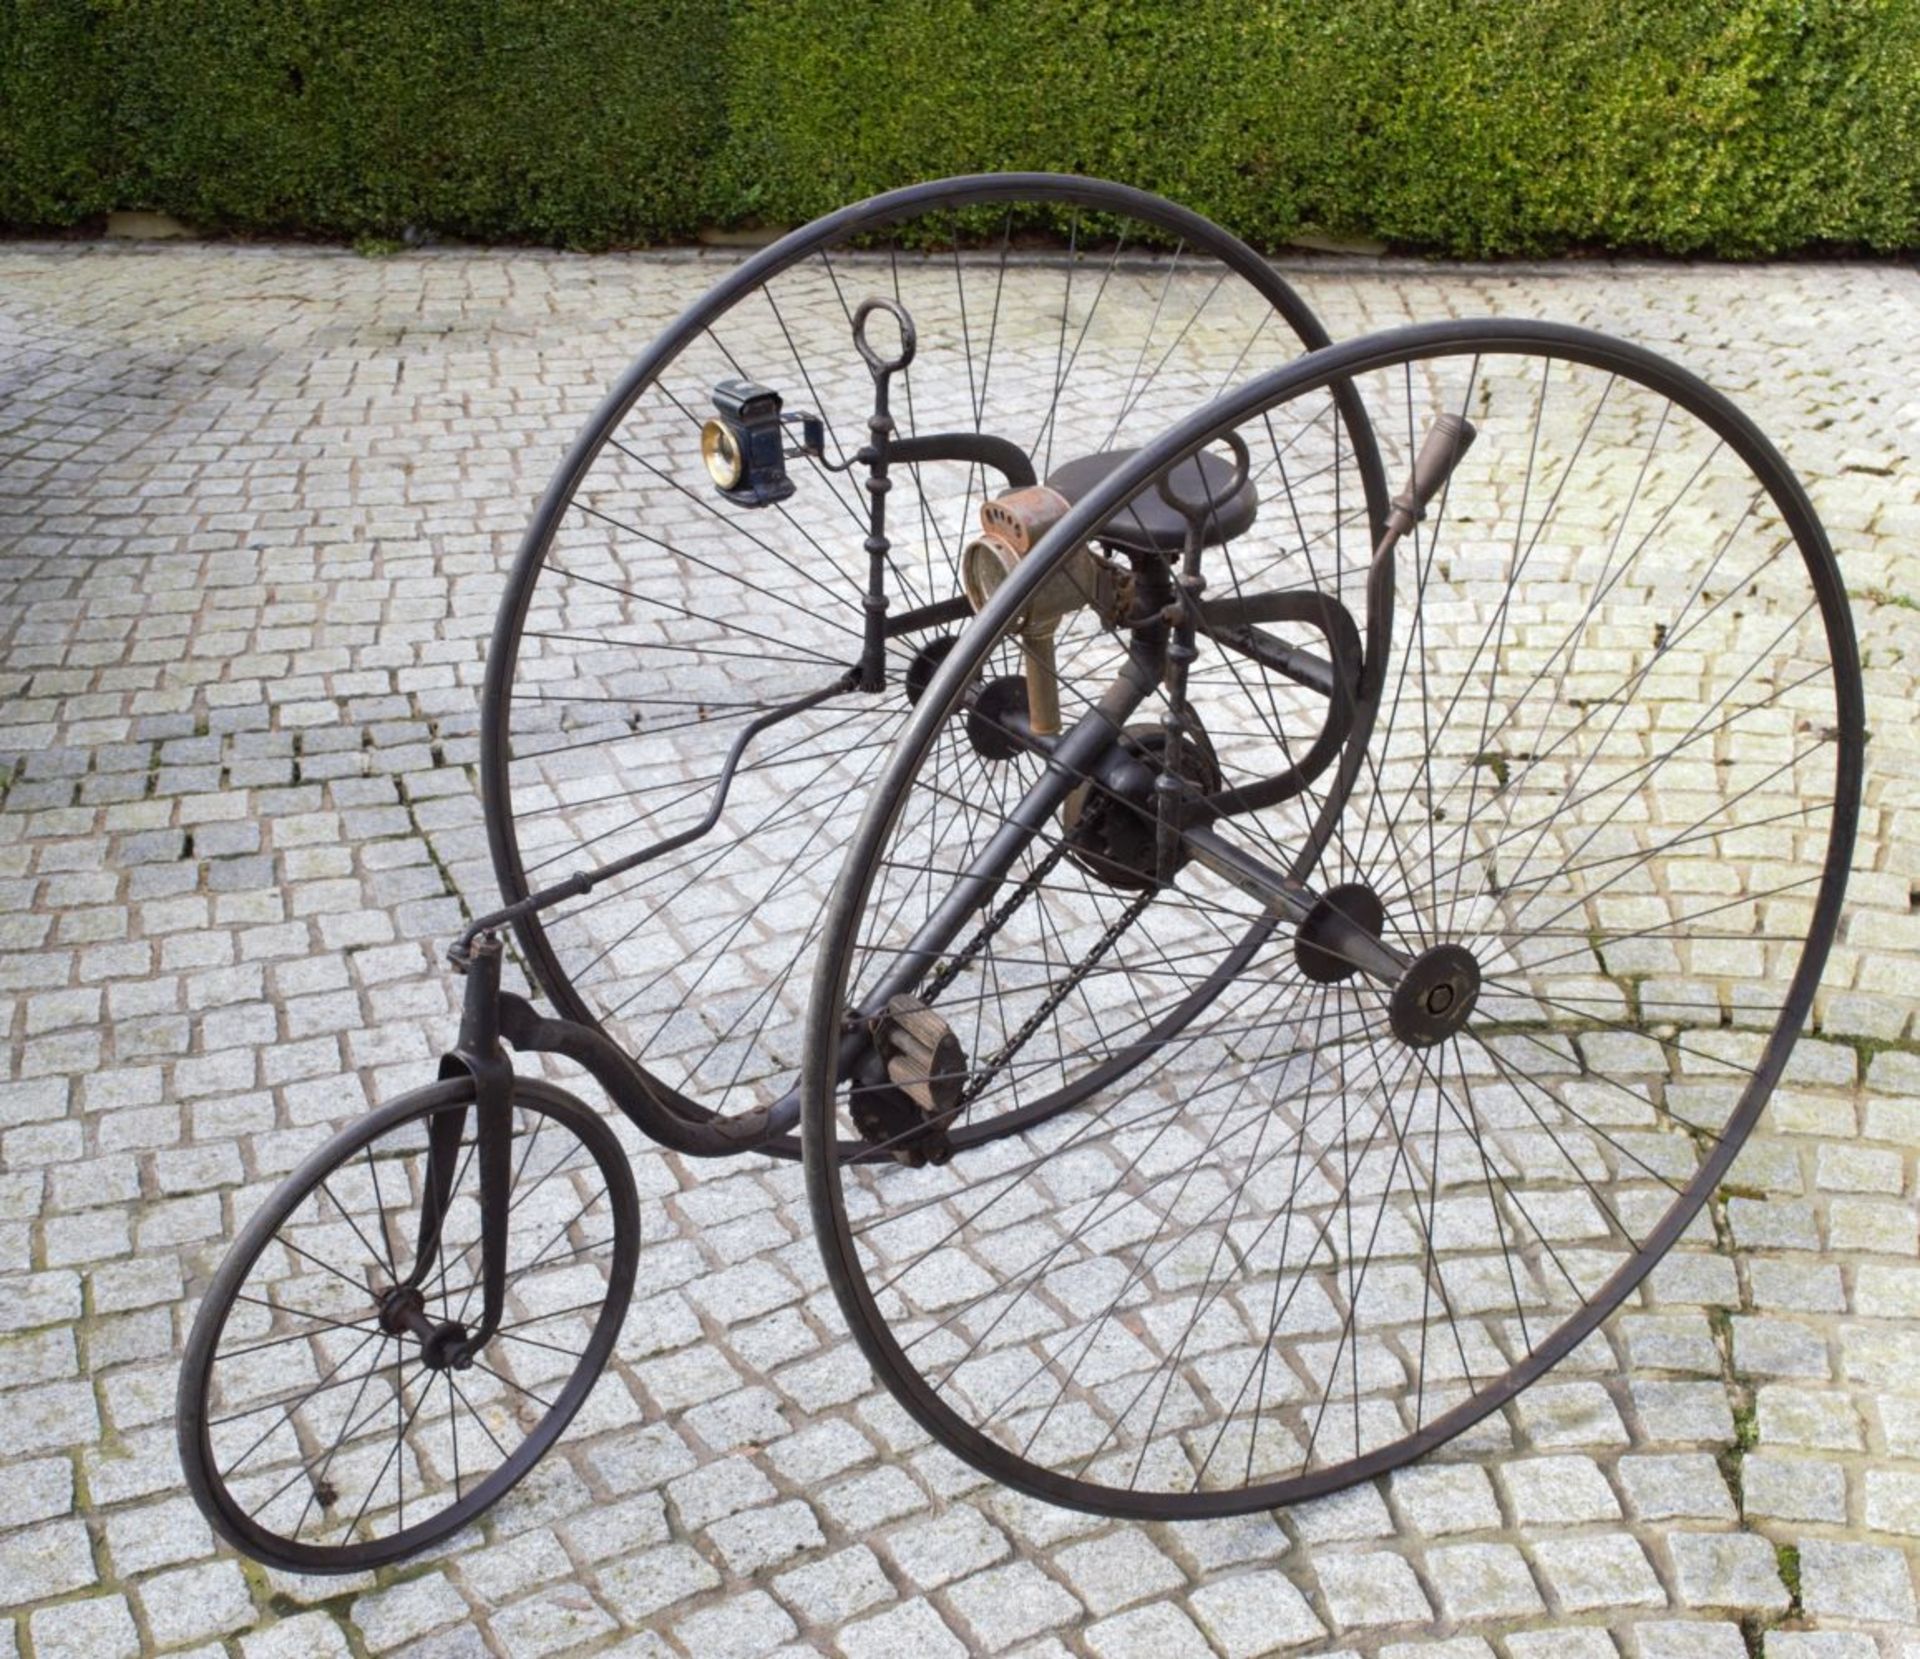 TRI-CYCLE, ATTRIBUTED TO HILLMAN, HERBERT AND COOPER, COVENTRY - Image 2 of 5